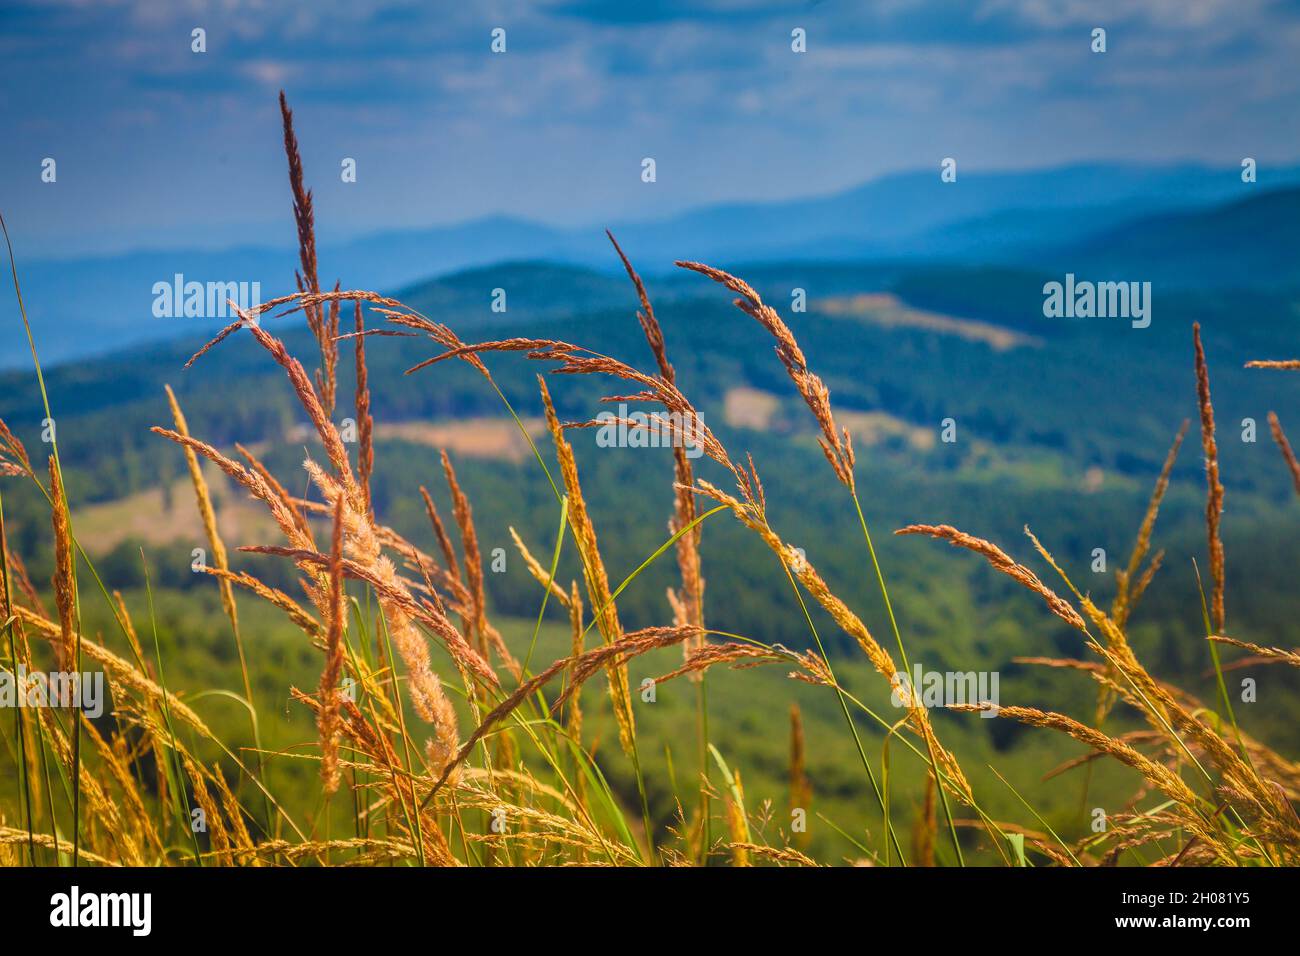 Epic background picture of peaceful mountain view through a net of golden grass growing on a hill. Stara Planina, Bulgaria Stock Photo